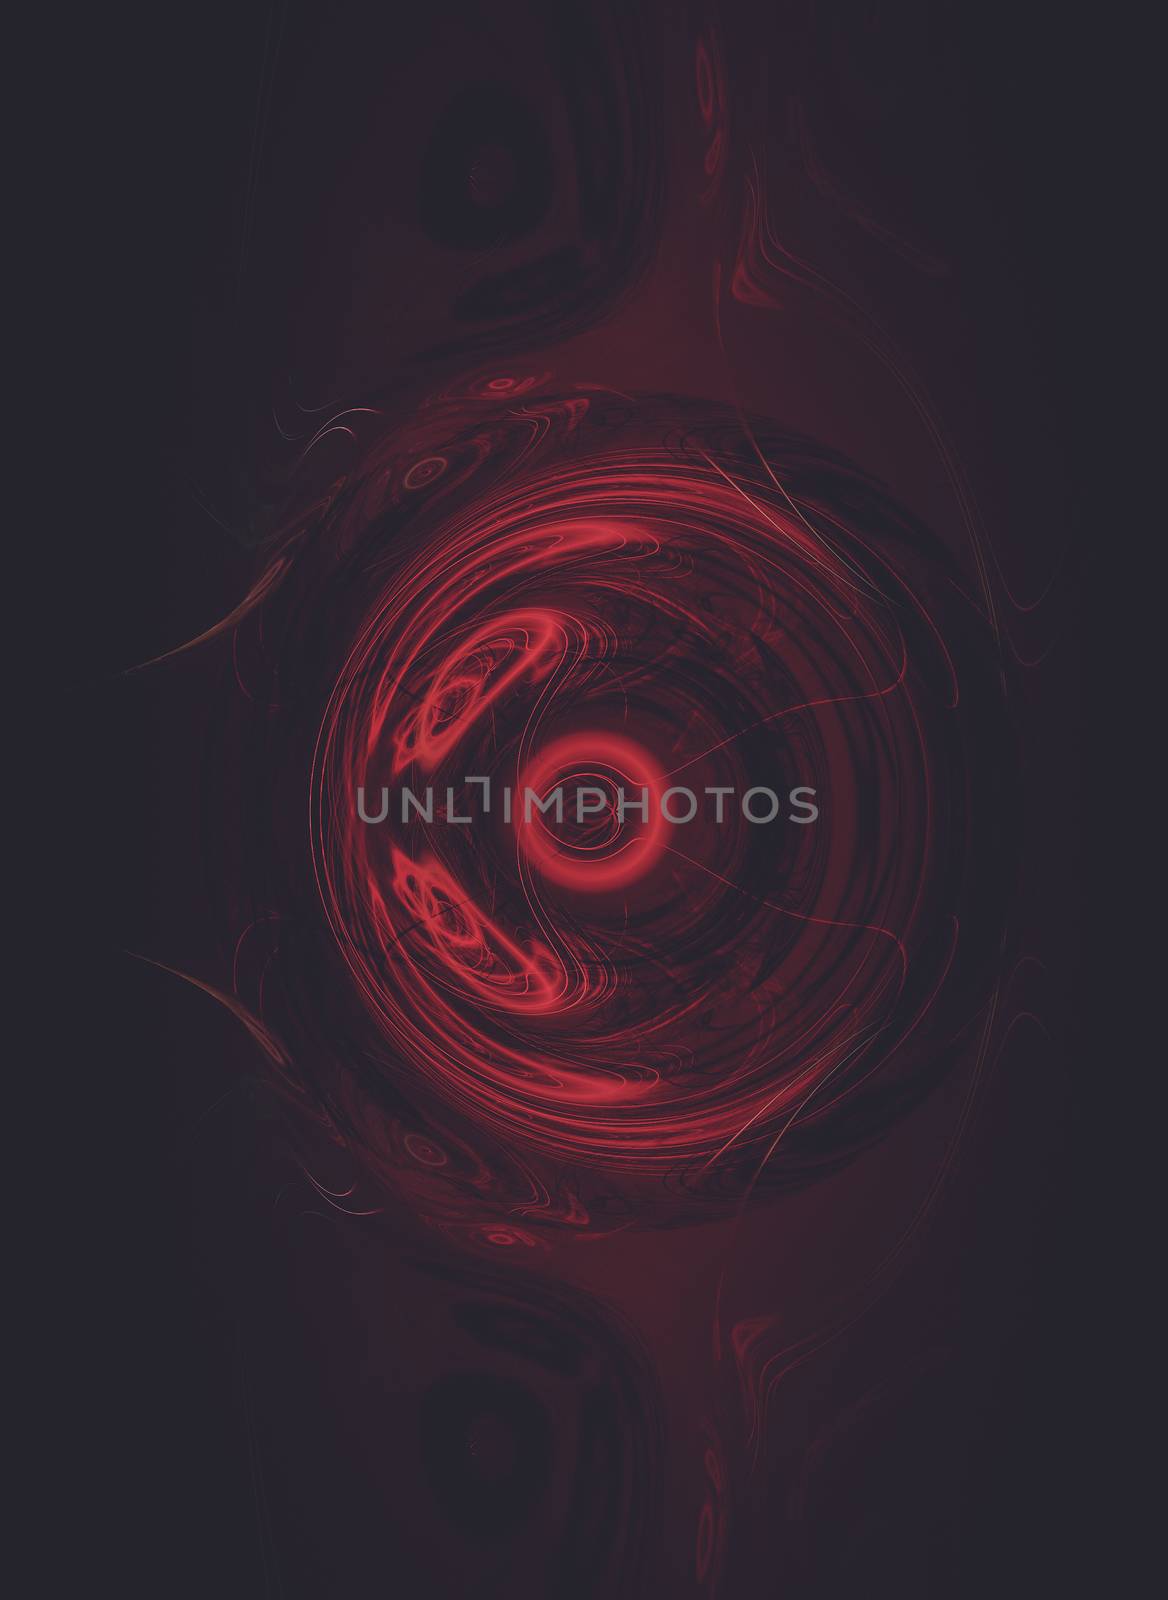 abstract hell, Creative design background, fractal styles with c by FernandoCortes